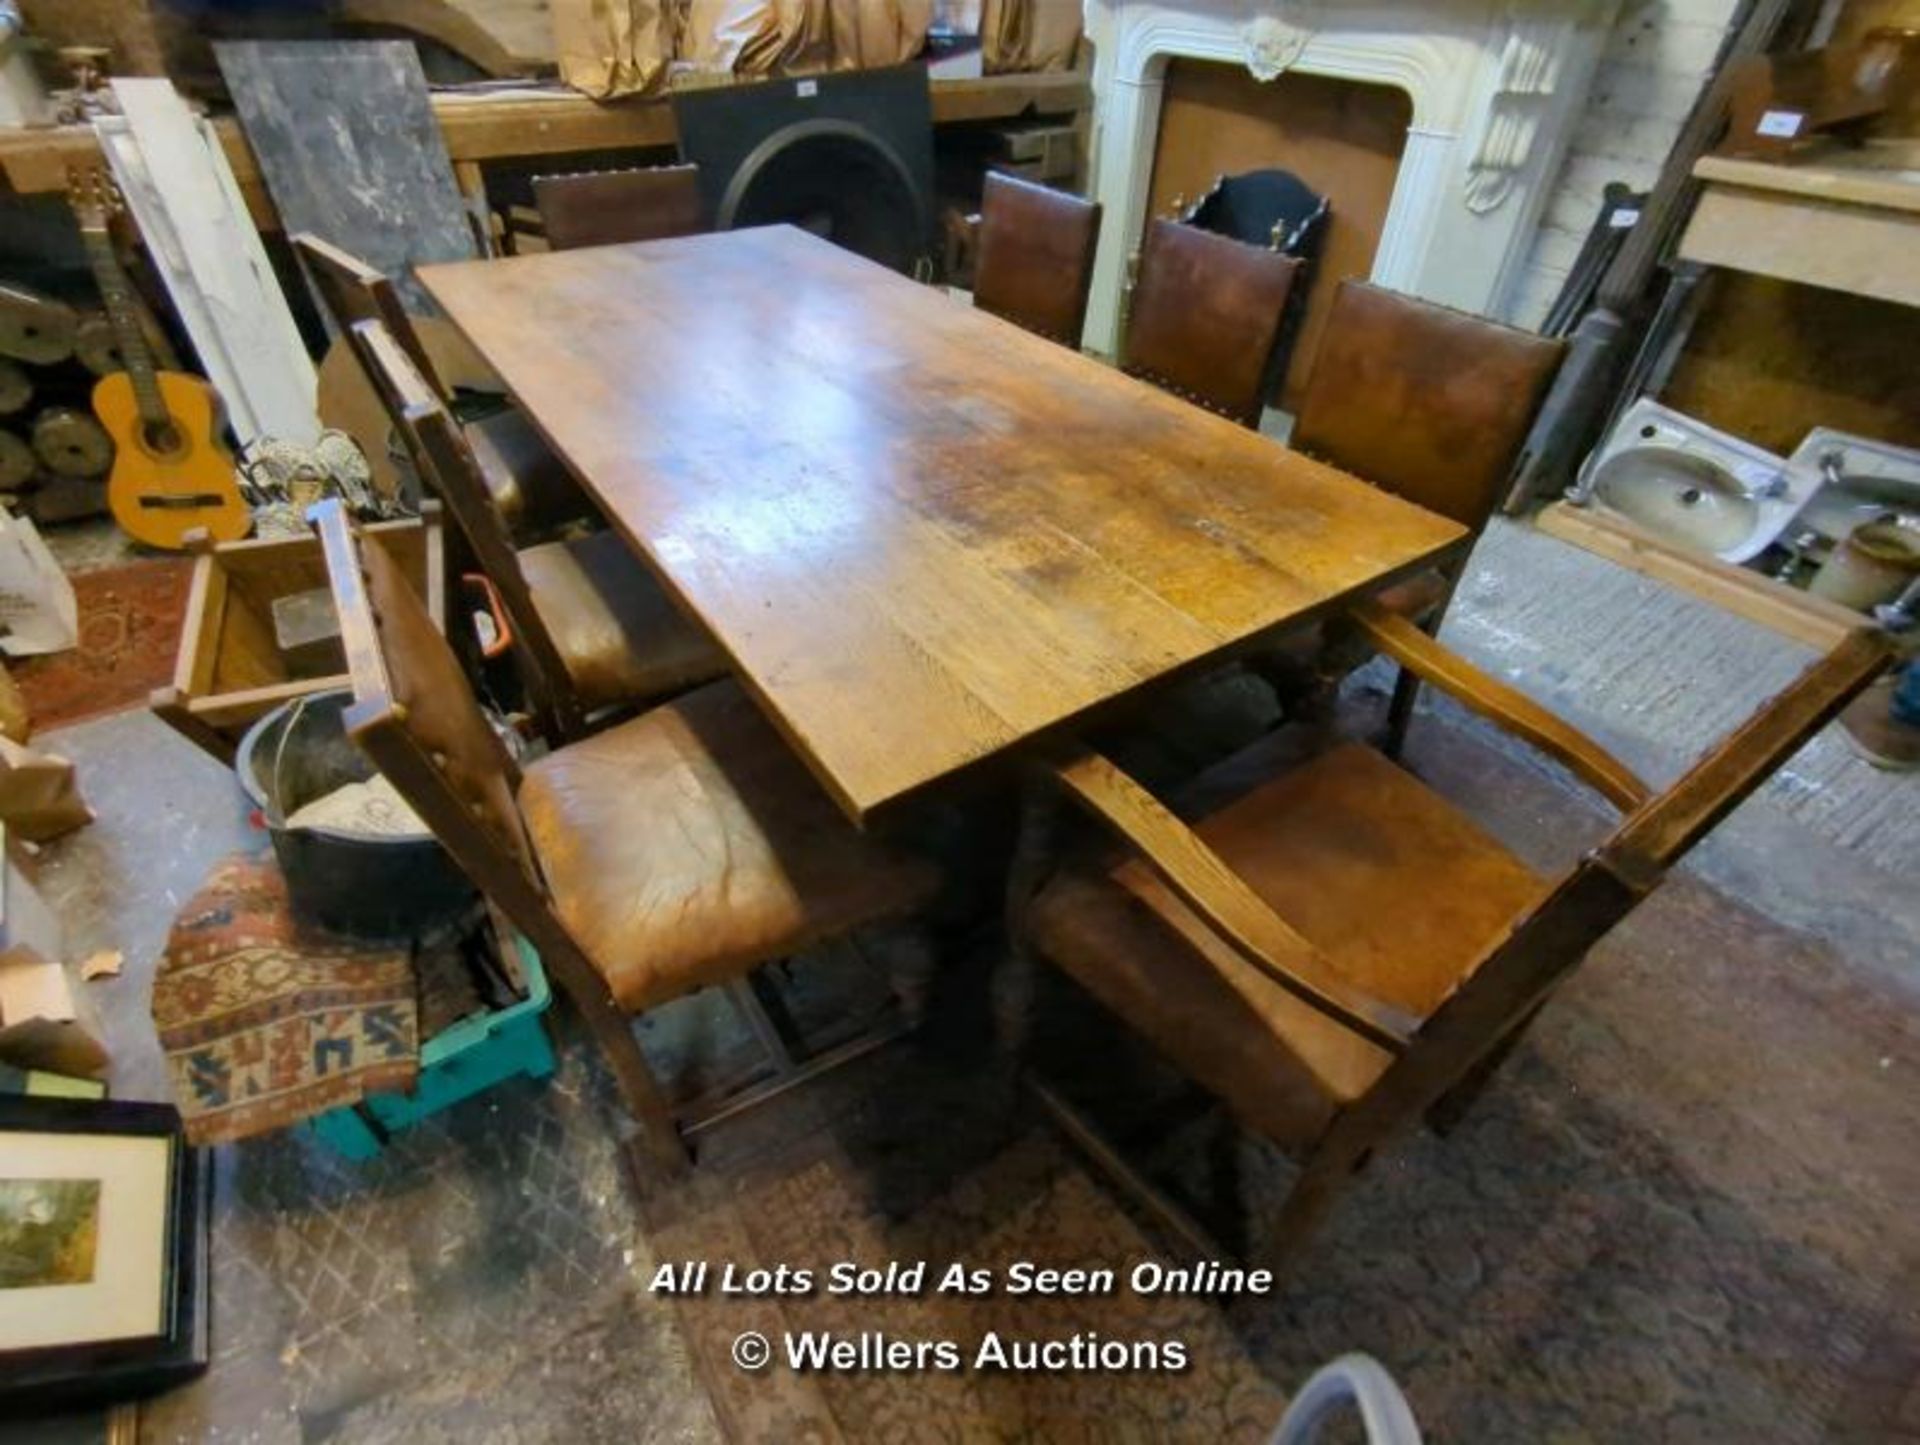 OAK TABLE AND EIGHT LEATHER BOUND CHAIRS - 29" H X 78" L X 3' W